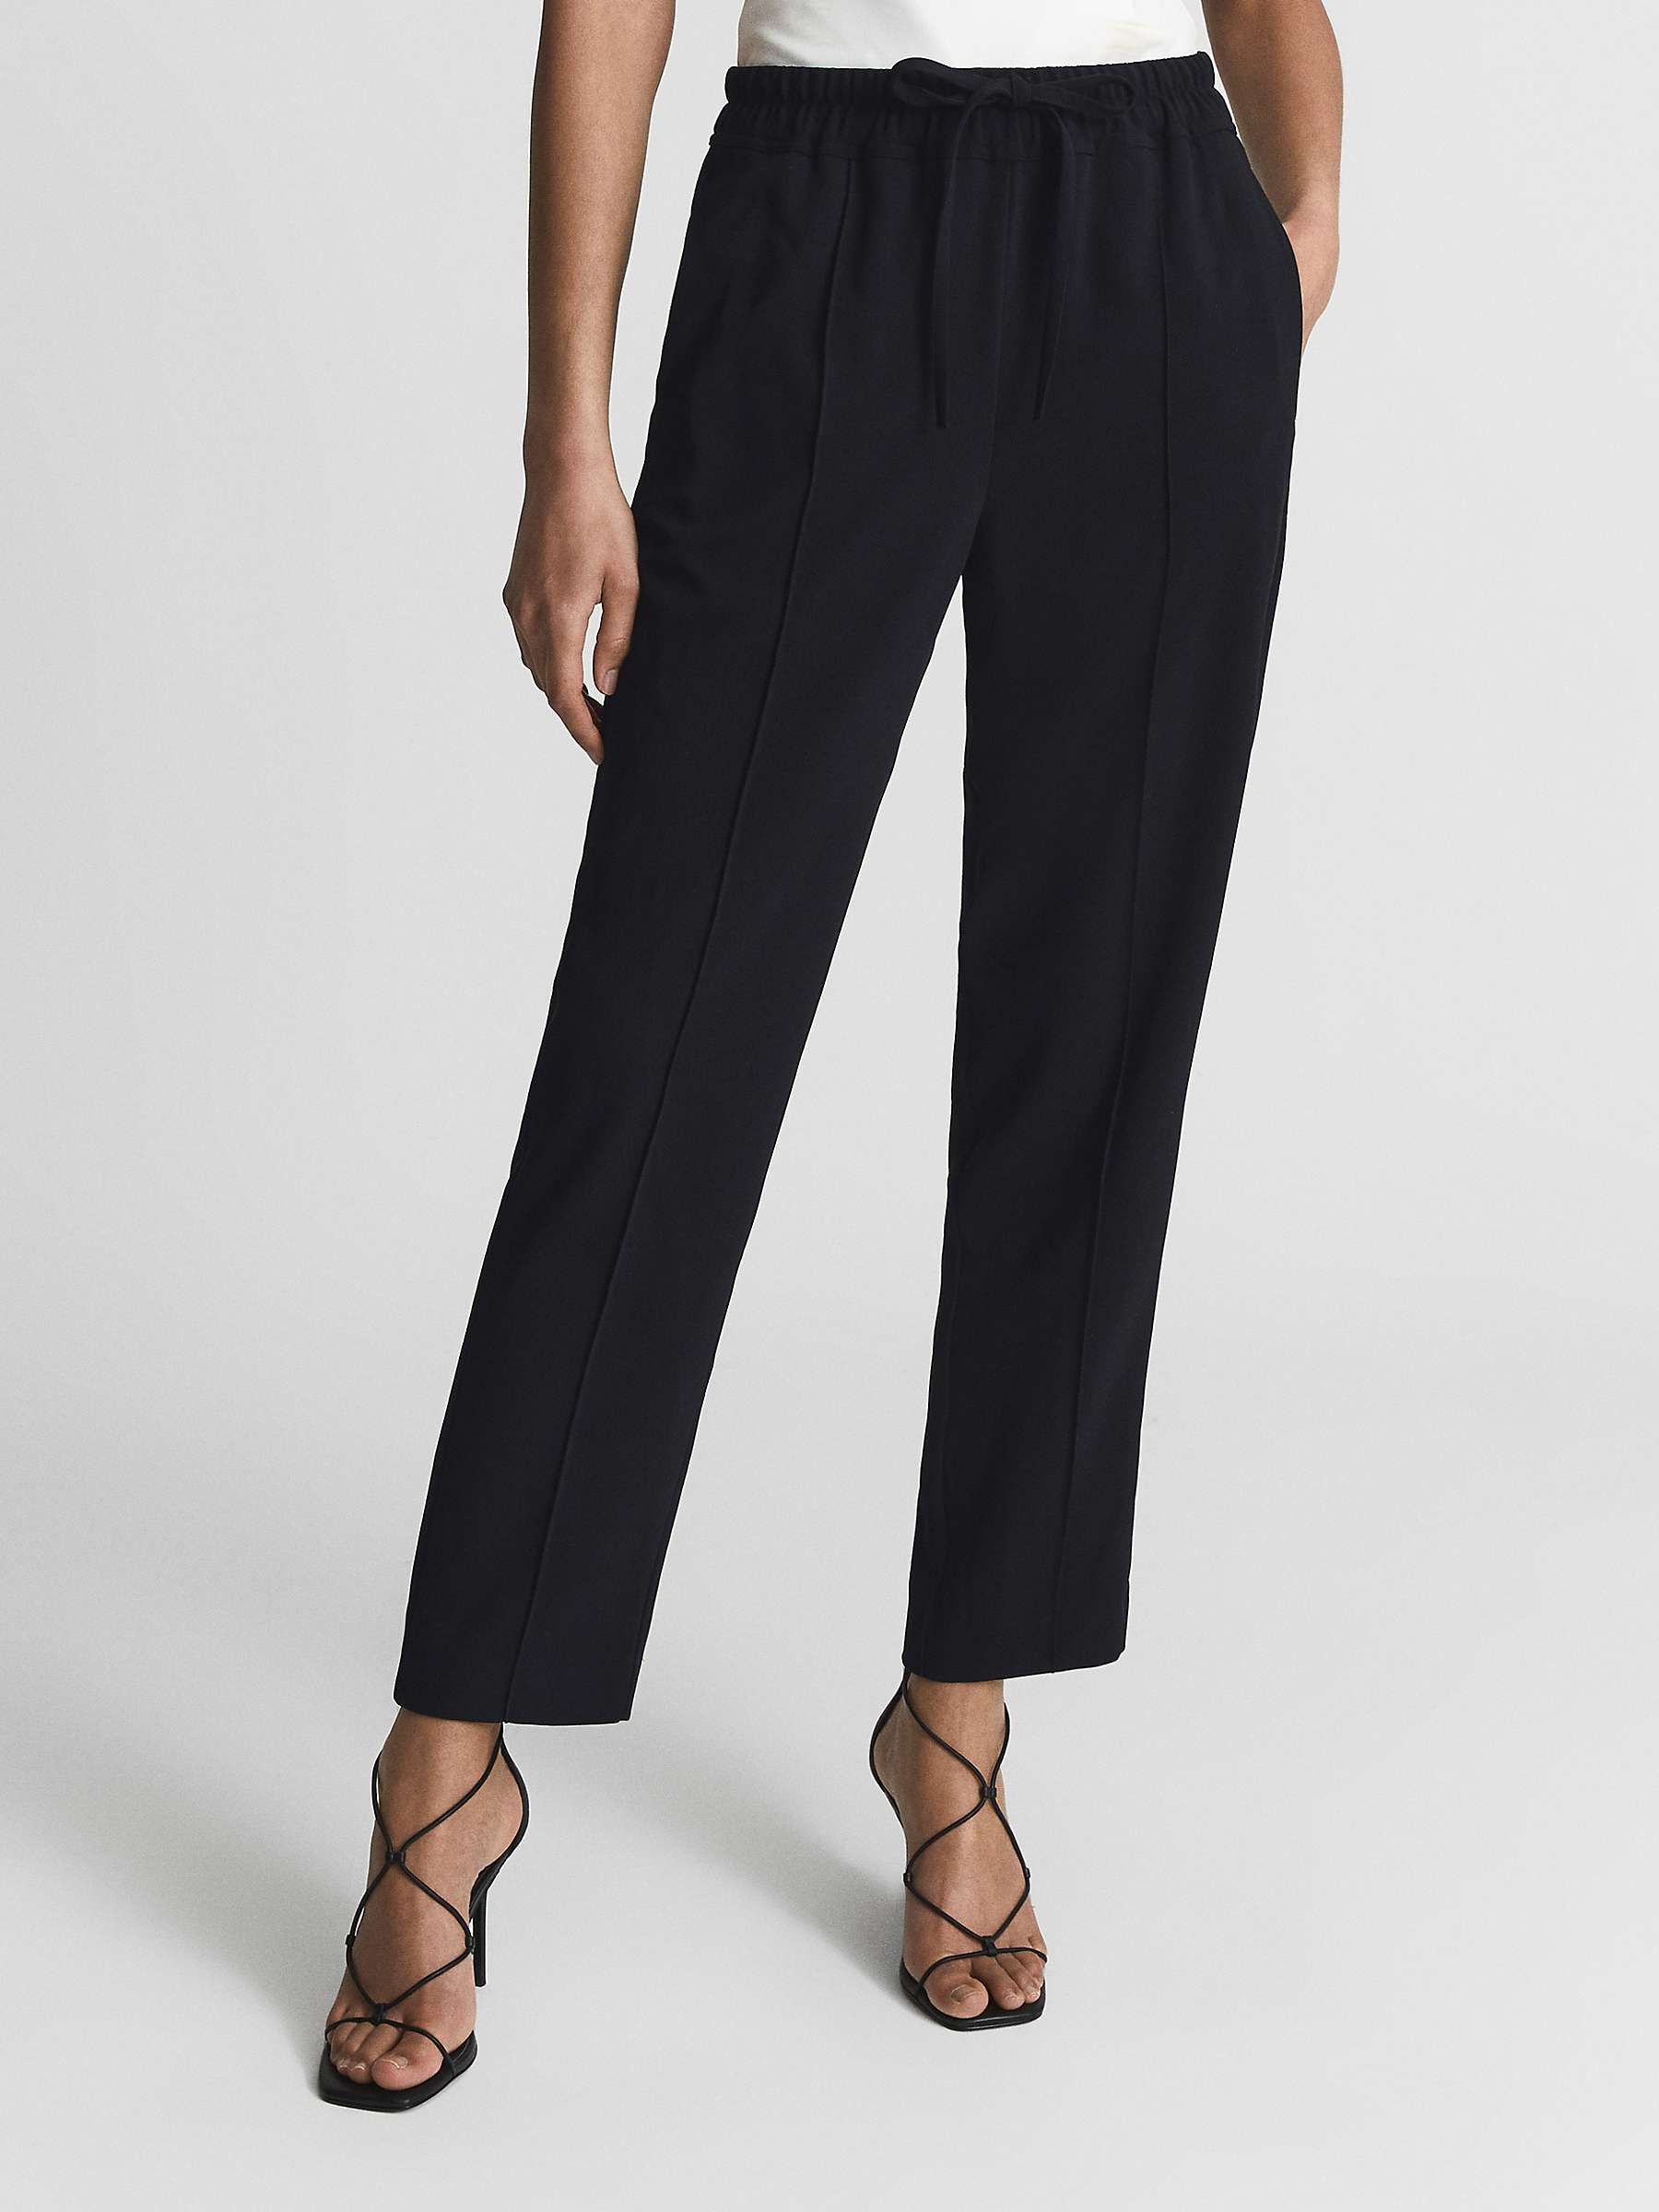 Buy Reiss Hailey Cropped Trousers, Jet Black Online at johnlewis.com